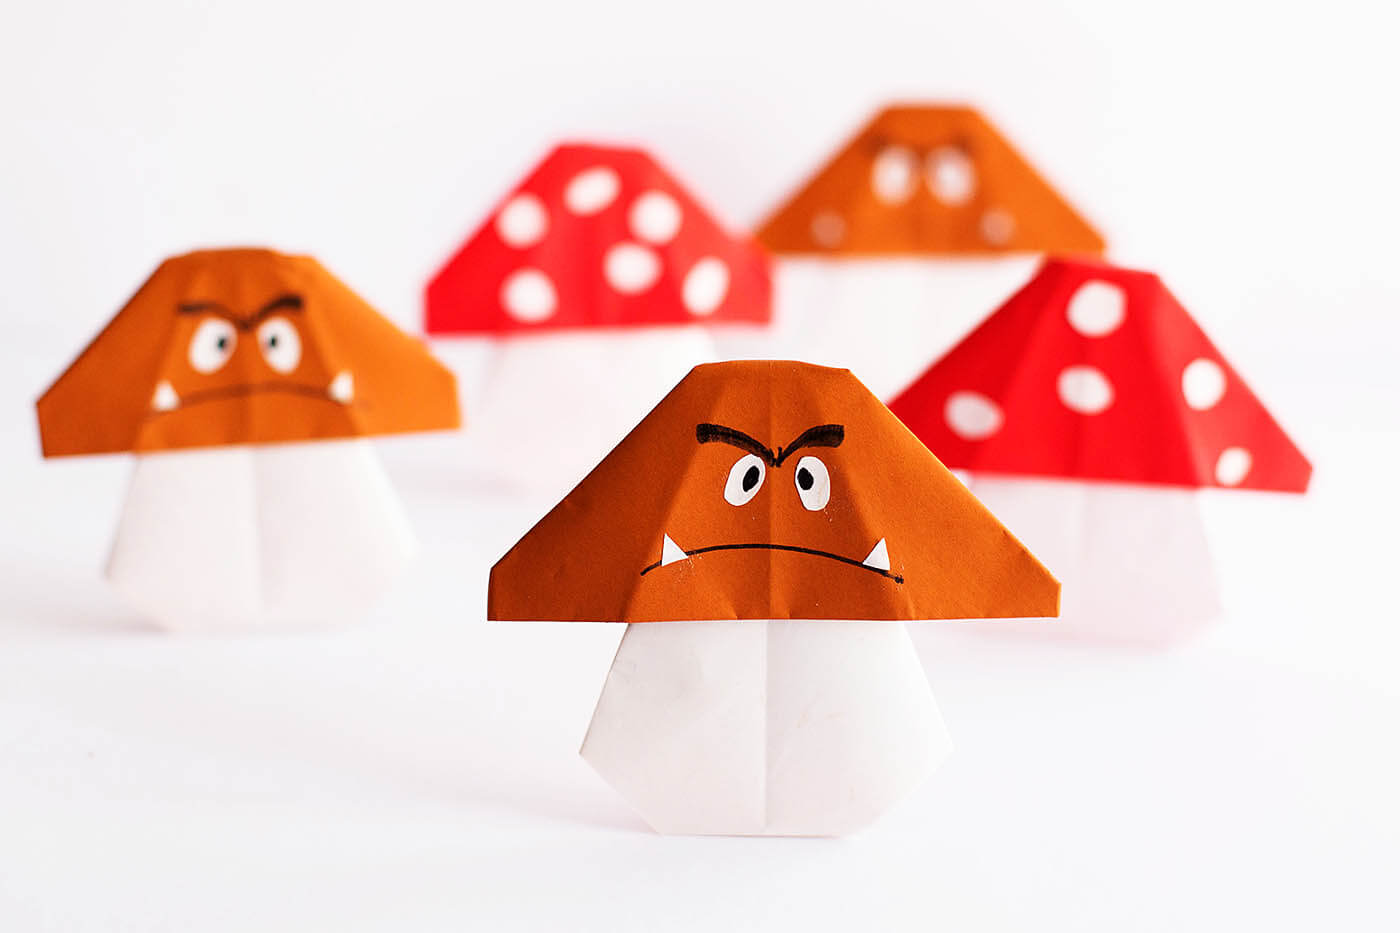 Angry Goomba Origami Craft For Super Mario Crafts and Activities for Kids Super Mario Crafts and Activities for Kids